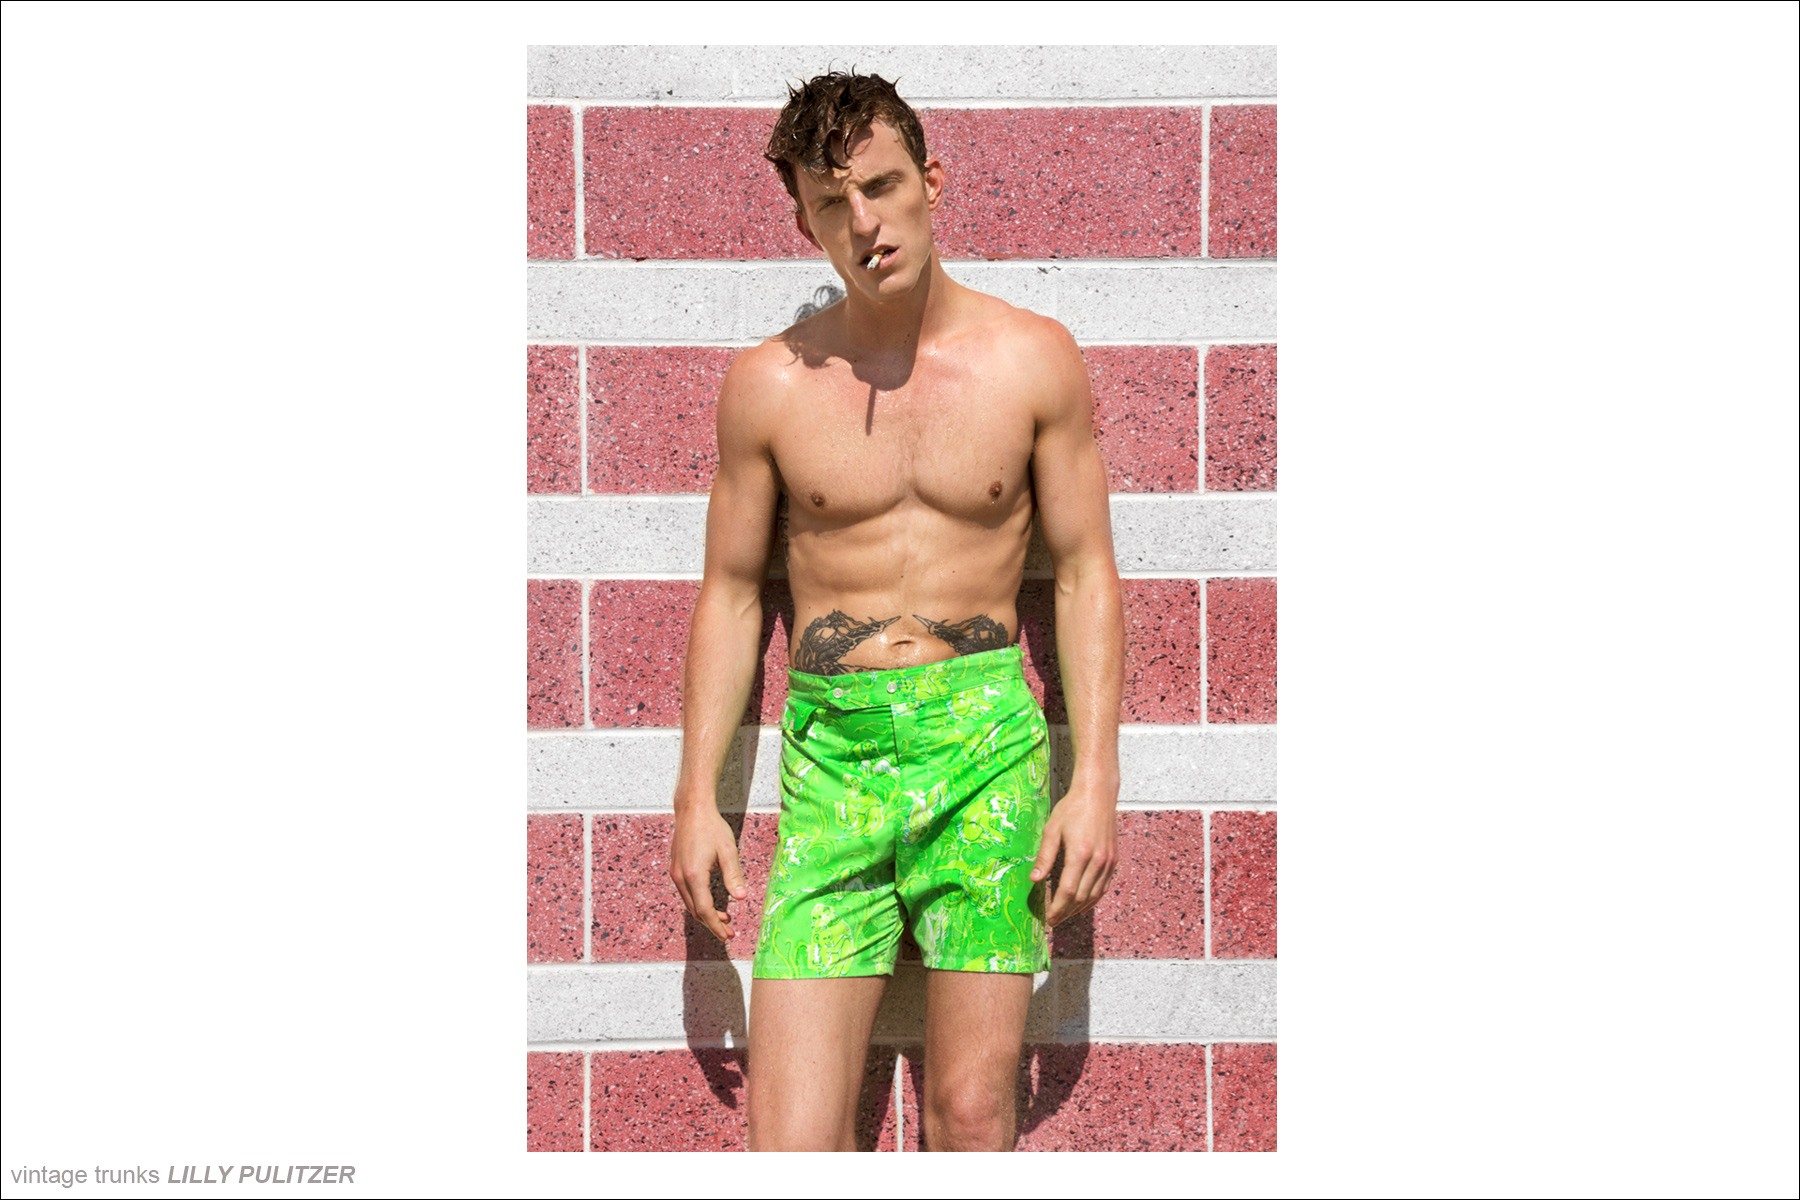 Men's vintage 1960's Lilly Pulitzer swim trunks, modeled by Brendon Beck for Ponyboy Magazine, photographed by Alexander Thompson.